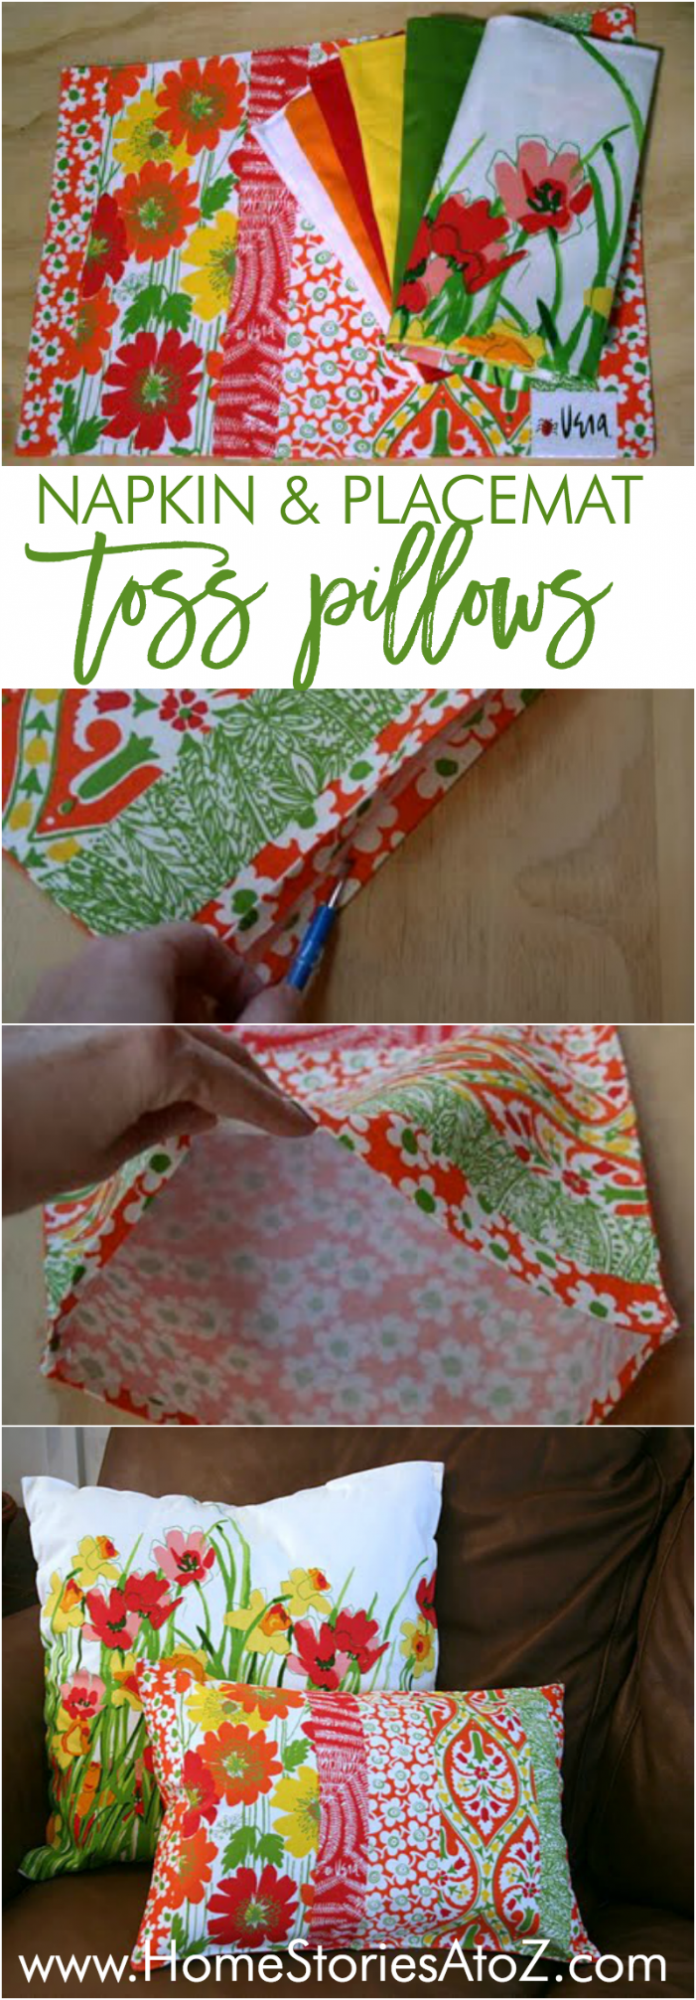 how-to-turn-napkins-and-placemats-into-toss-pillows